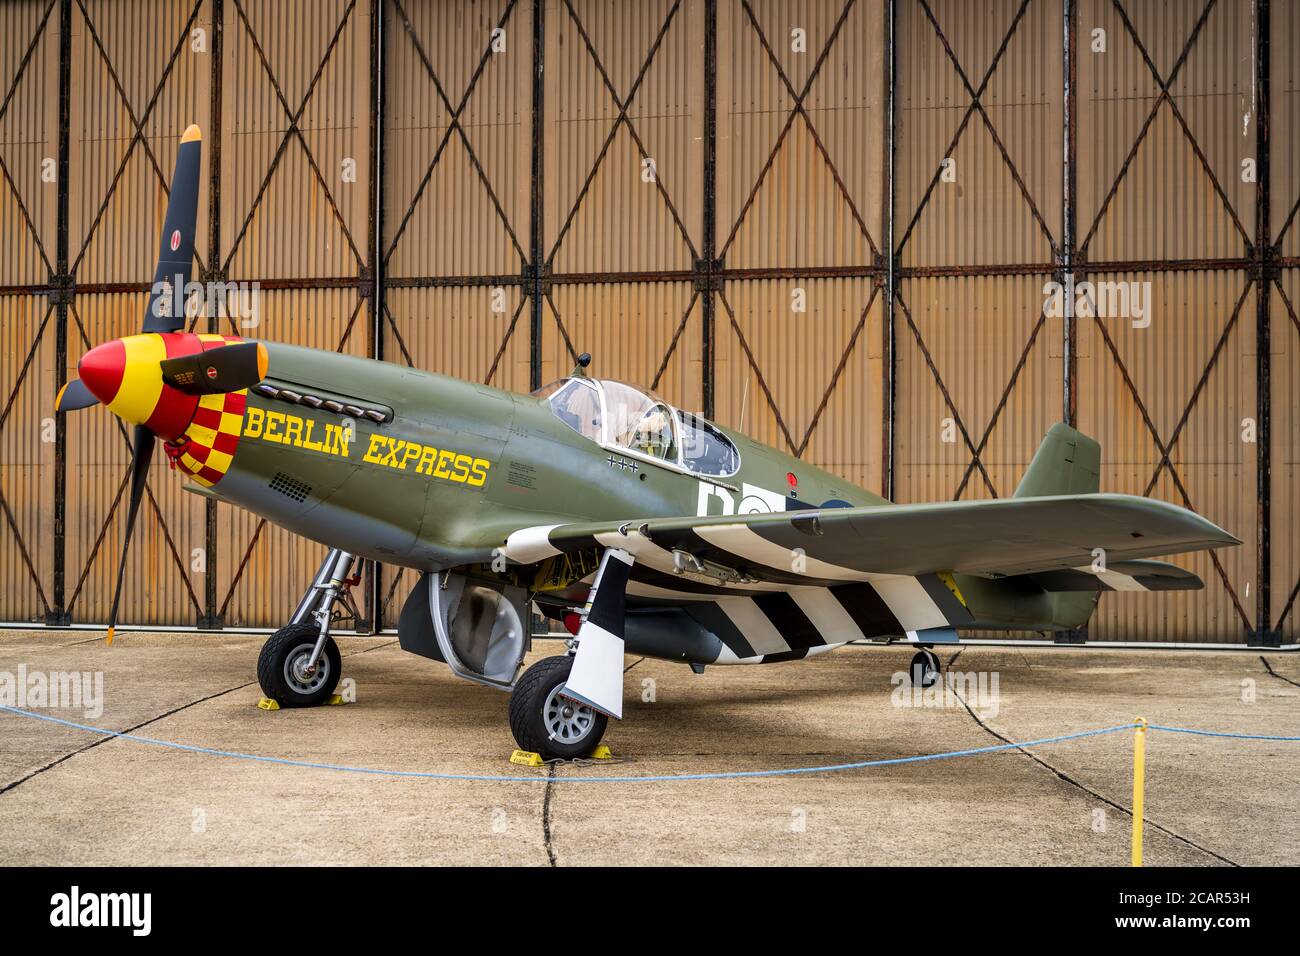 P-51B Mustang in “Berlin Express” paint scheme (N-515ZB) at the Imperial War Museum IWM Duxford. Part of the Fighter Collection. Built 1943. Stock Photo